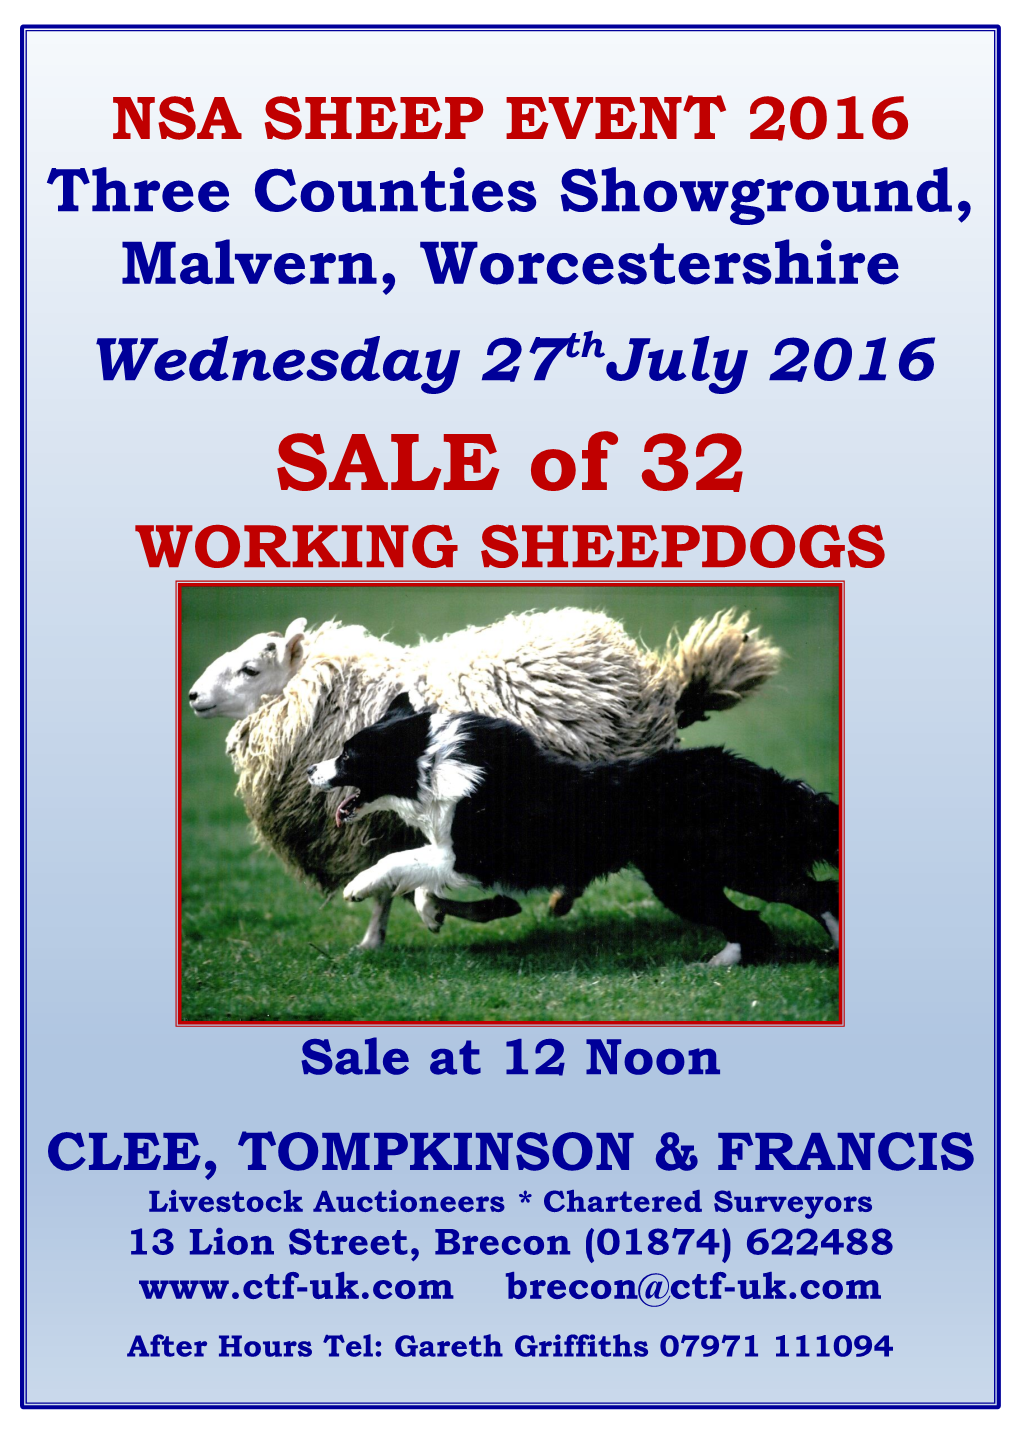 SALE of 32 WORKING SHEEPDOGS